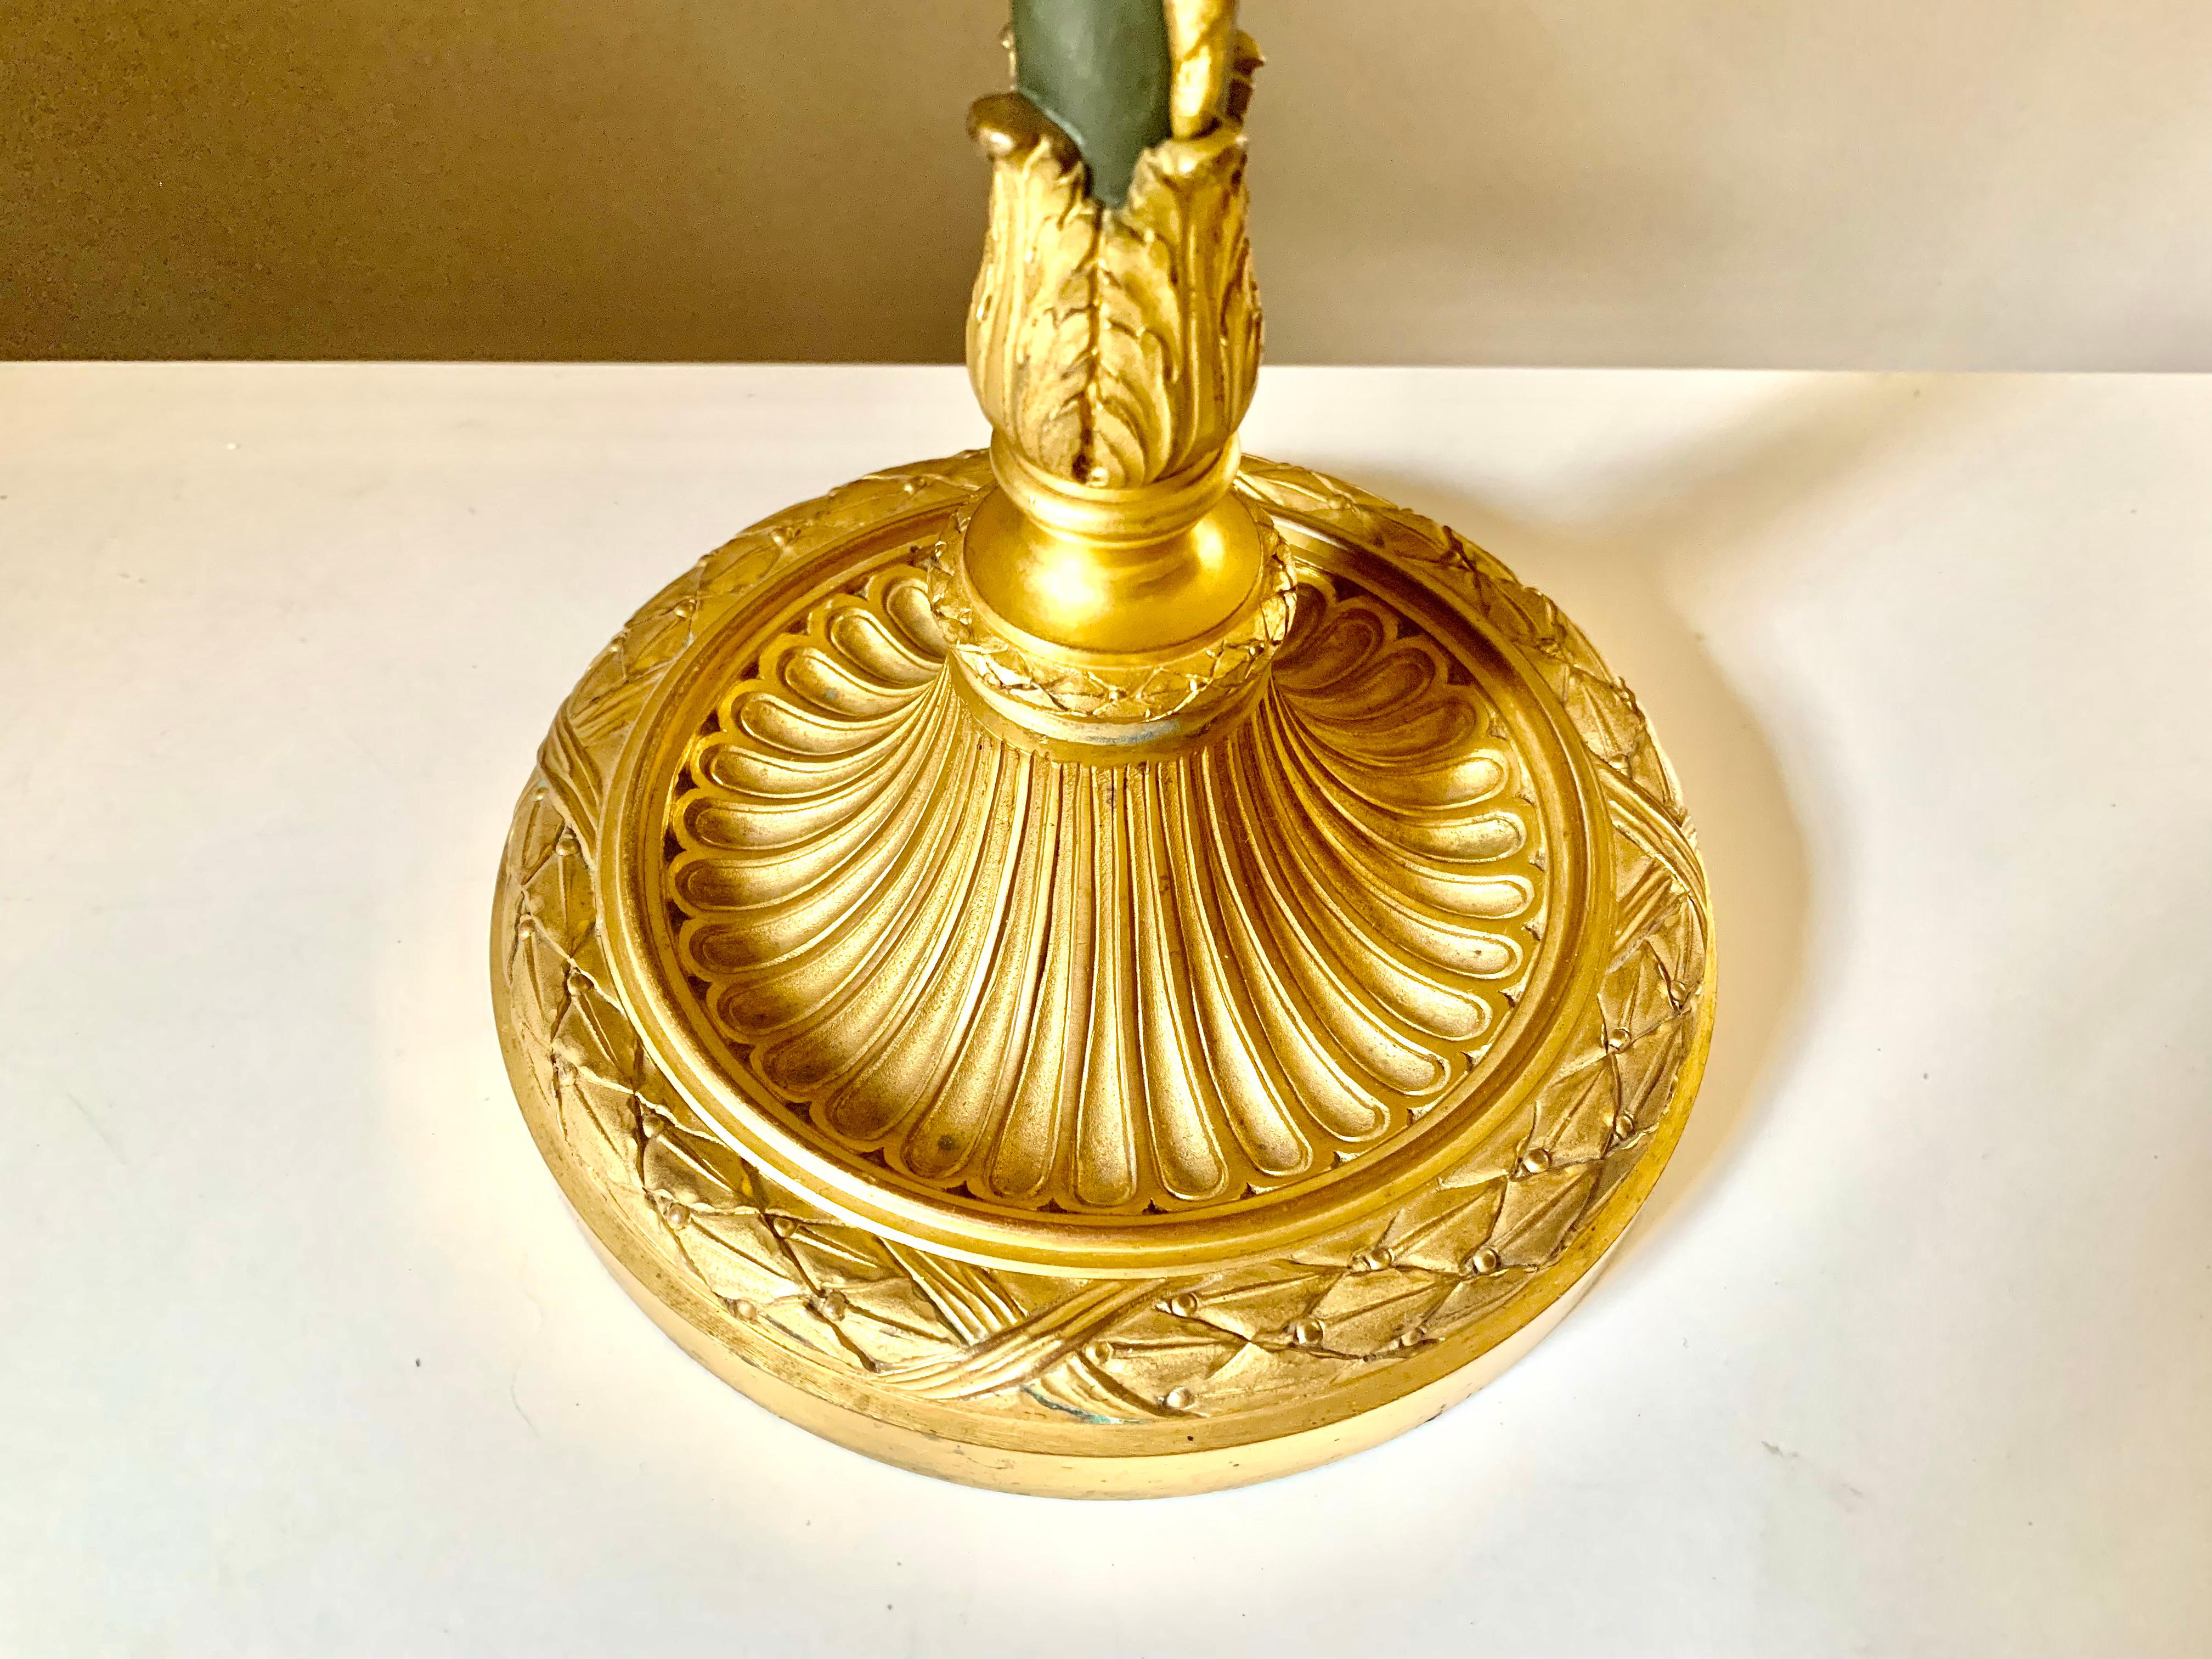 Fine Antique French Neoclassical Style Gilt and Patinated Bronze Desk Lamp In Good Condition For Sale In New York, NY